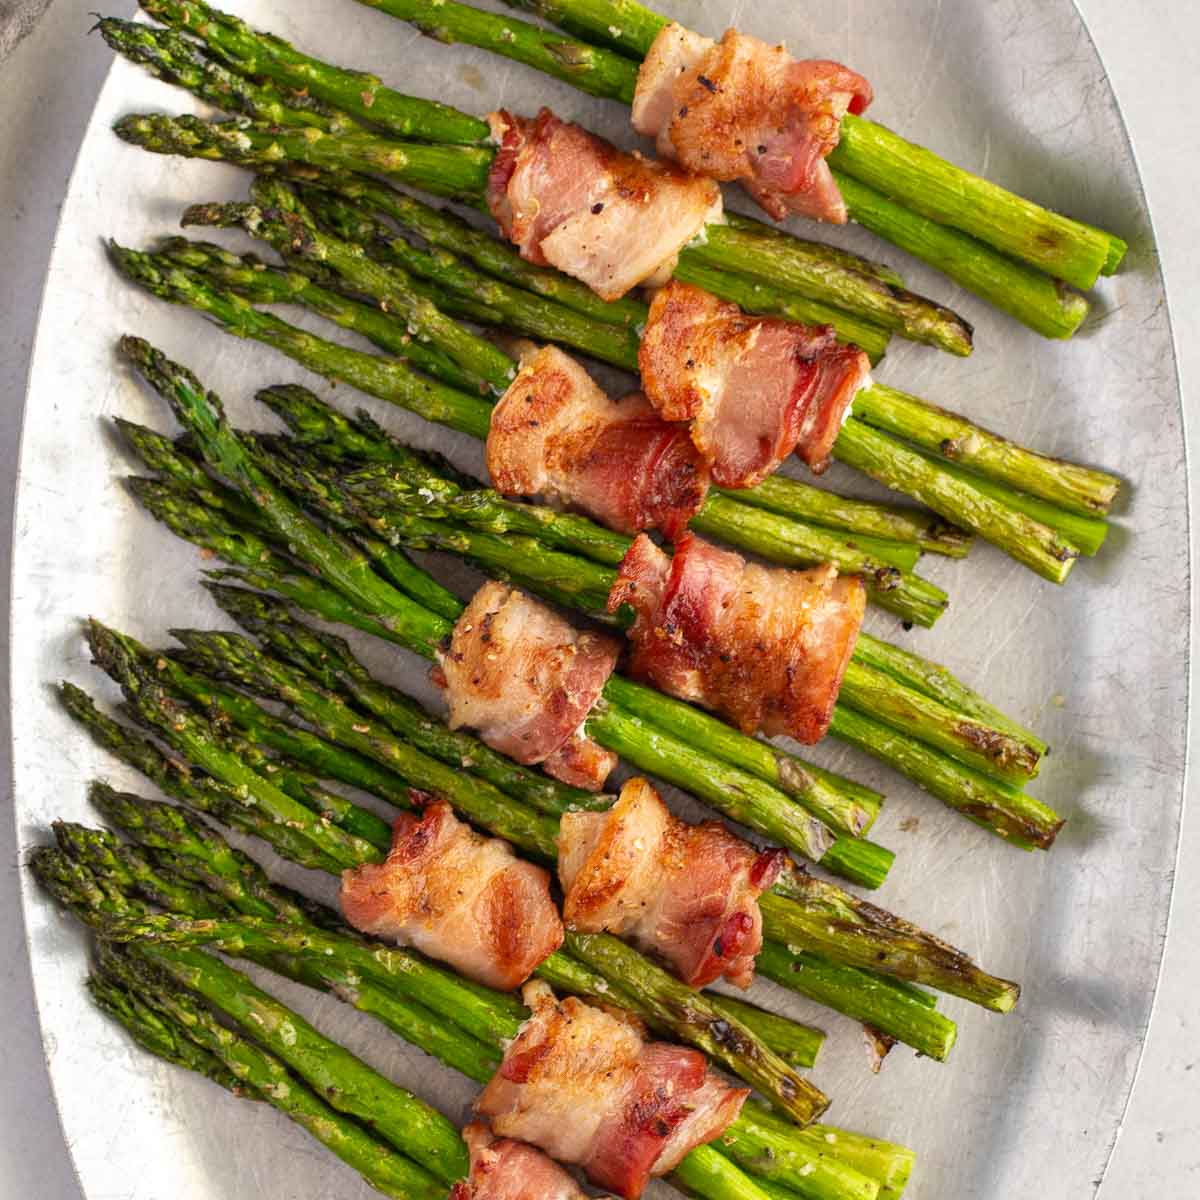 Bacon wrapped asparagus laid out on a metal serving tray.